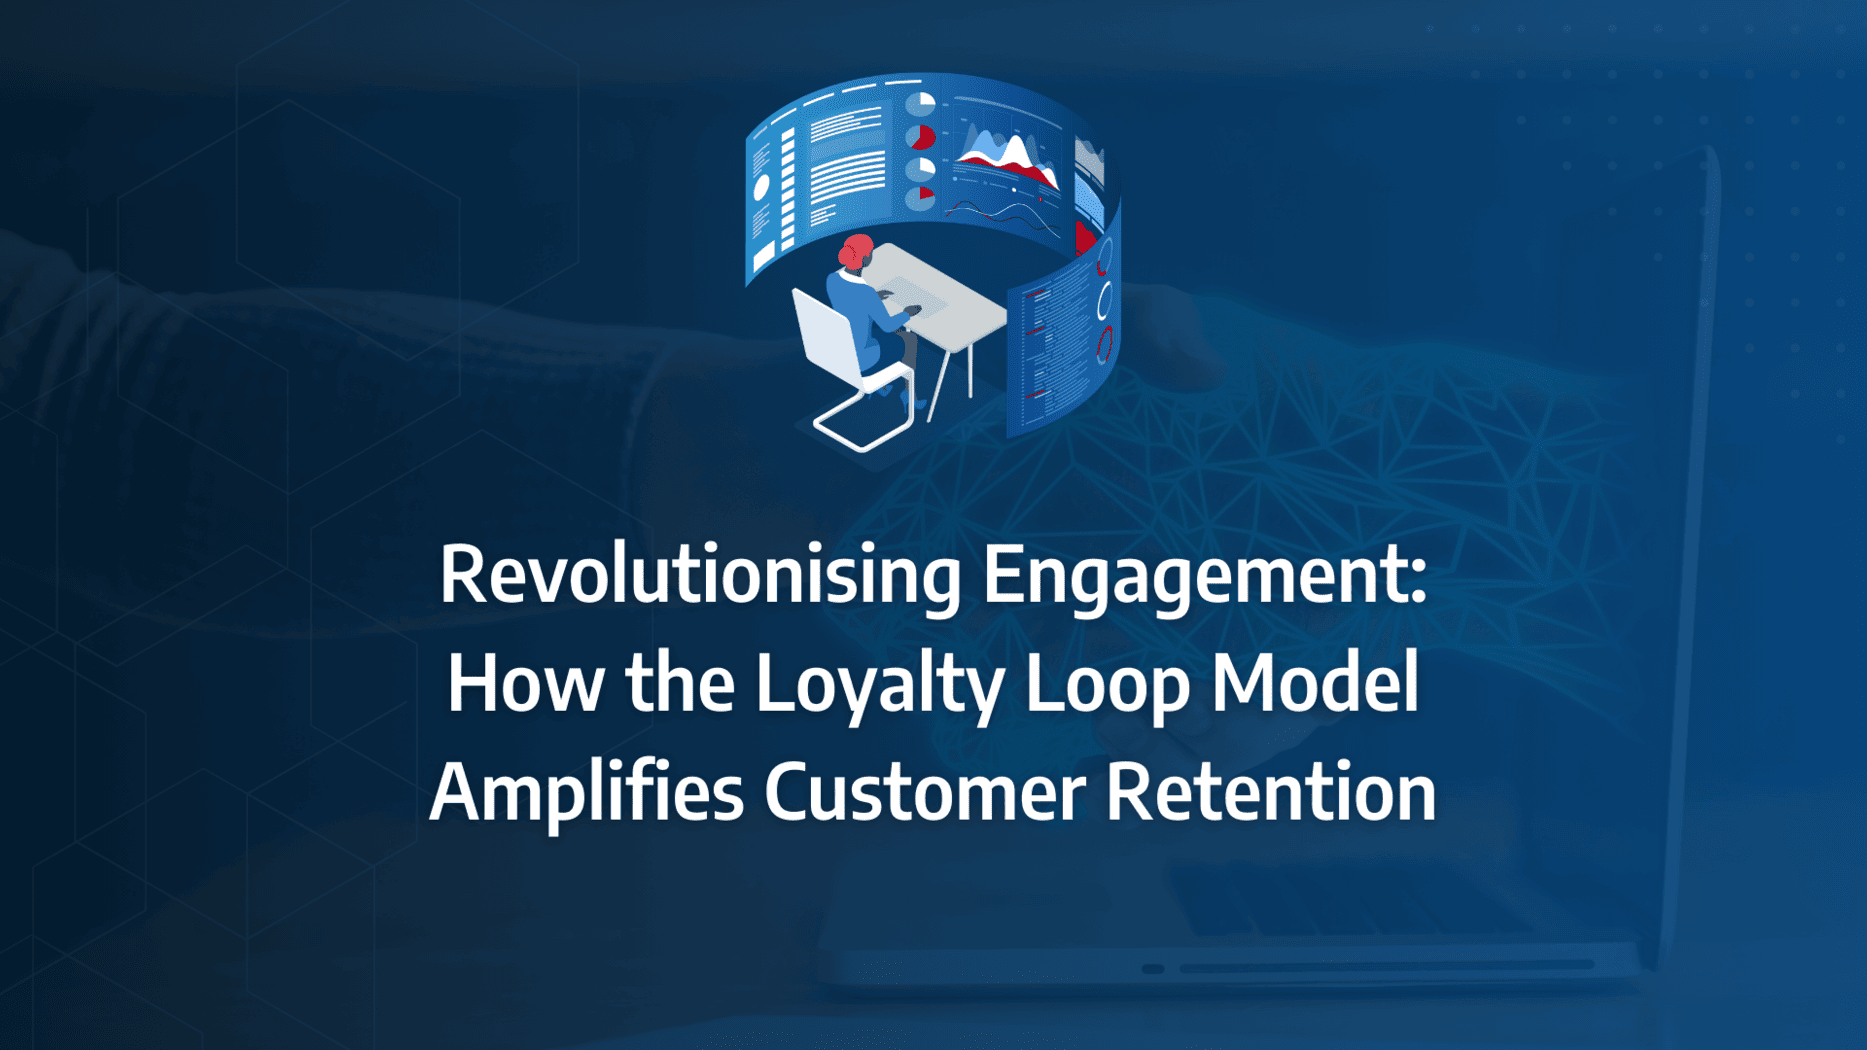 Loyalty loop: effectively reinforced through a customer-centric model, integrated closed loop programs, strategic loyalty rules, and comprehensive loop analysis for enhanced customer engagement and retention.: strategy framework diagram for loyalty loop model, customer loyalty loop, closed loop loyalty program, loyalty rules